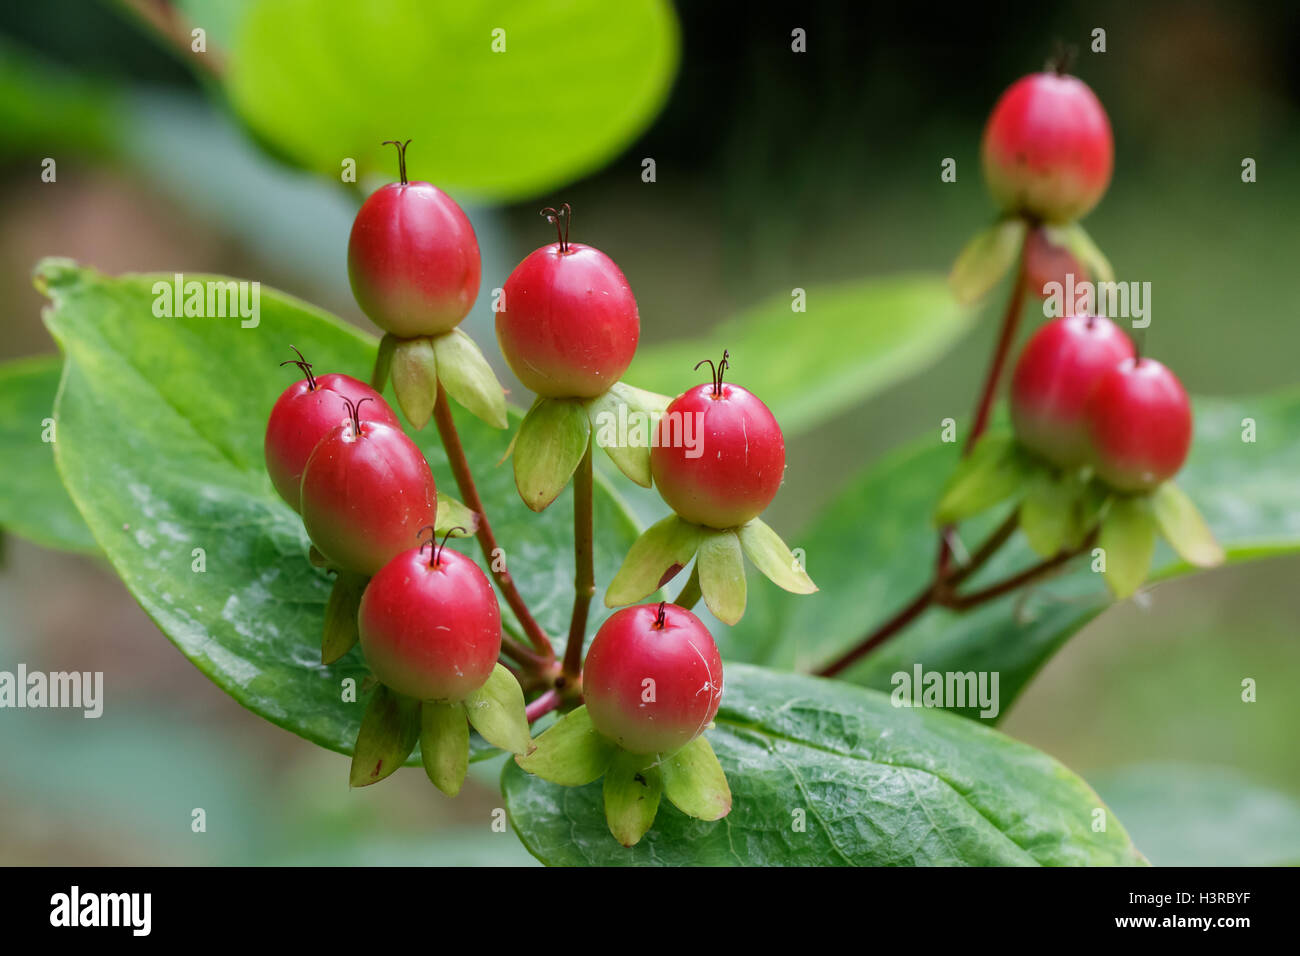 Hypericum red berries or fruit Stock Photo